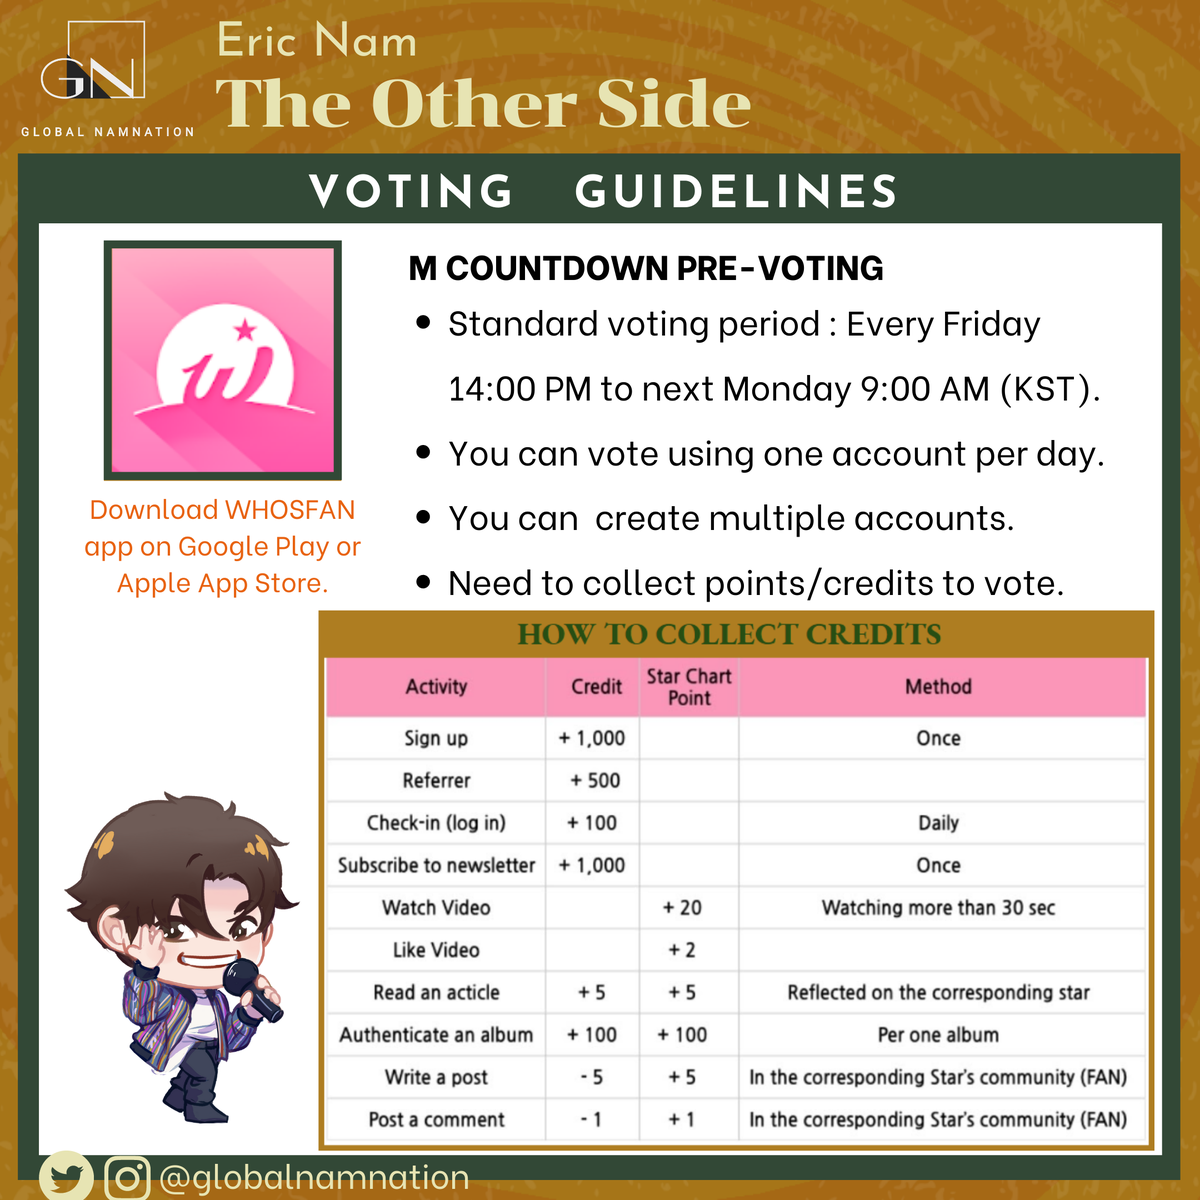 WHOSFAN   #VotingGuide (1/3) #EricNamScheduleEric Nam's Activities for July 31, 2020.Don't forget to vote Eric Nam on MWAVE and WHOSFAN for MNet Countdown. Please see separate guidelines.  #EricNam  #에릭남  #TheOtherSide  #ParadiseWithEricNam